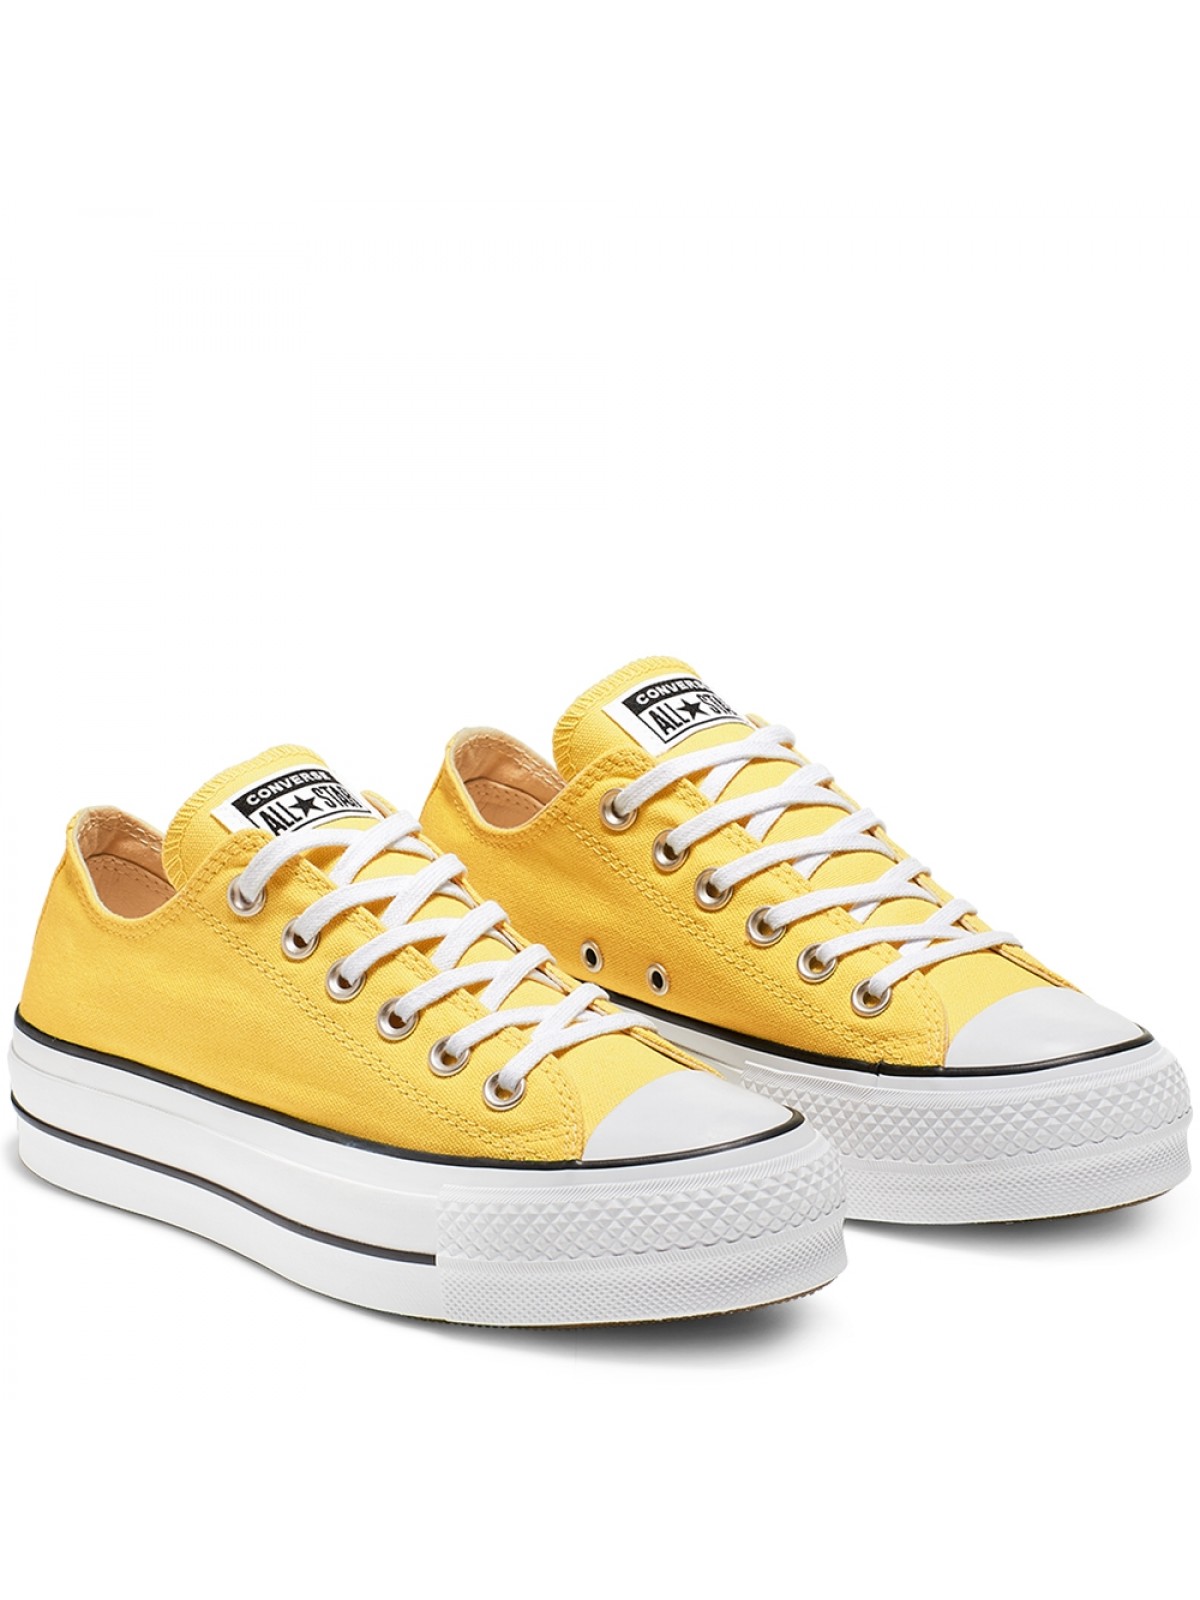 Converse Chuck Taylor all star Lift basse toile plateforme jaune